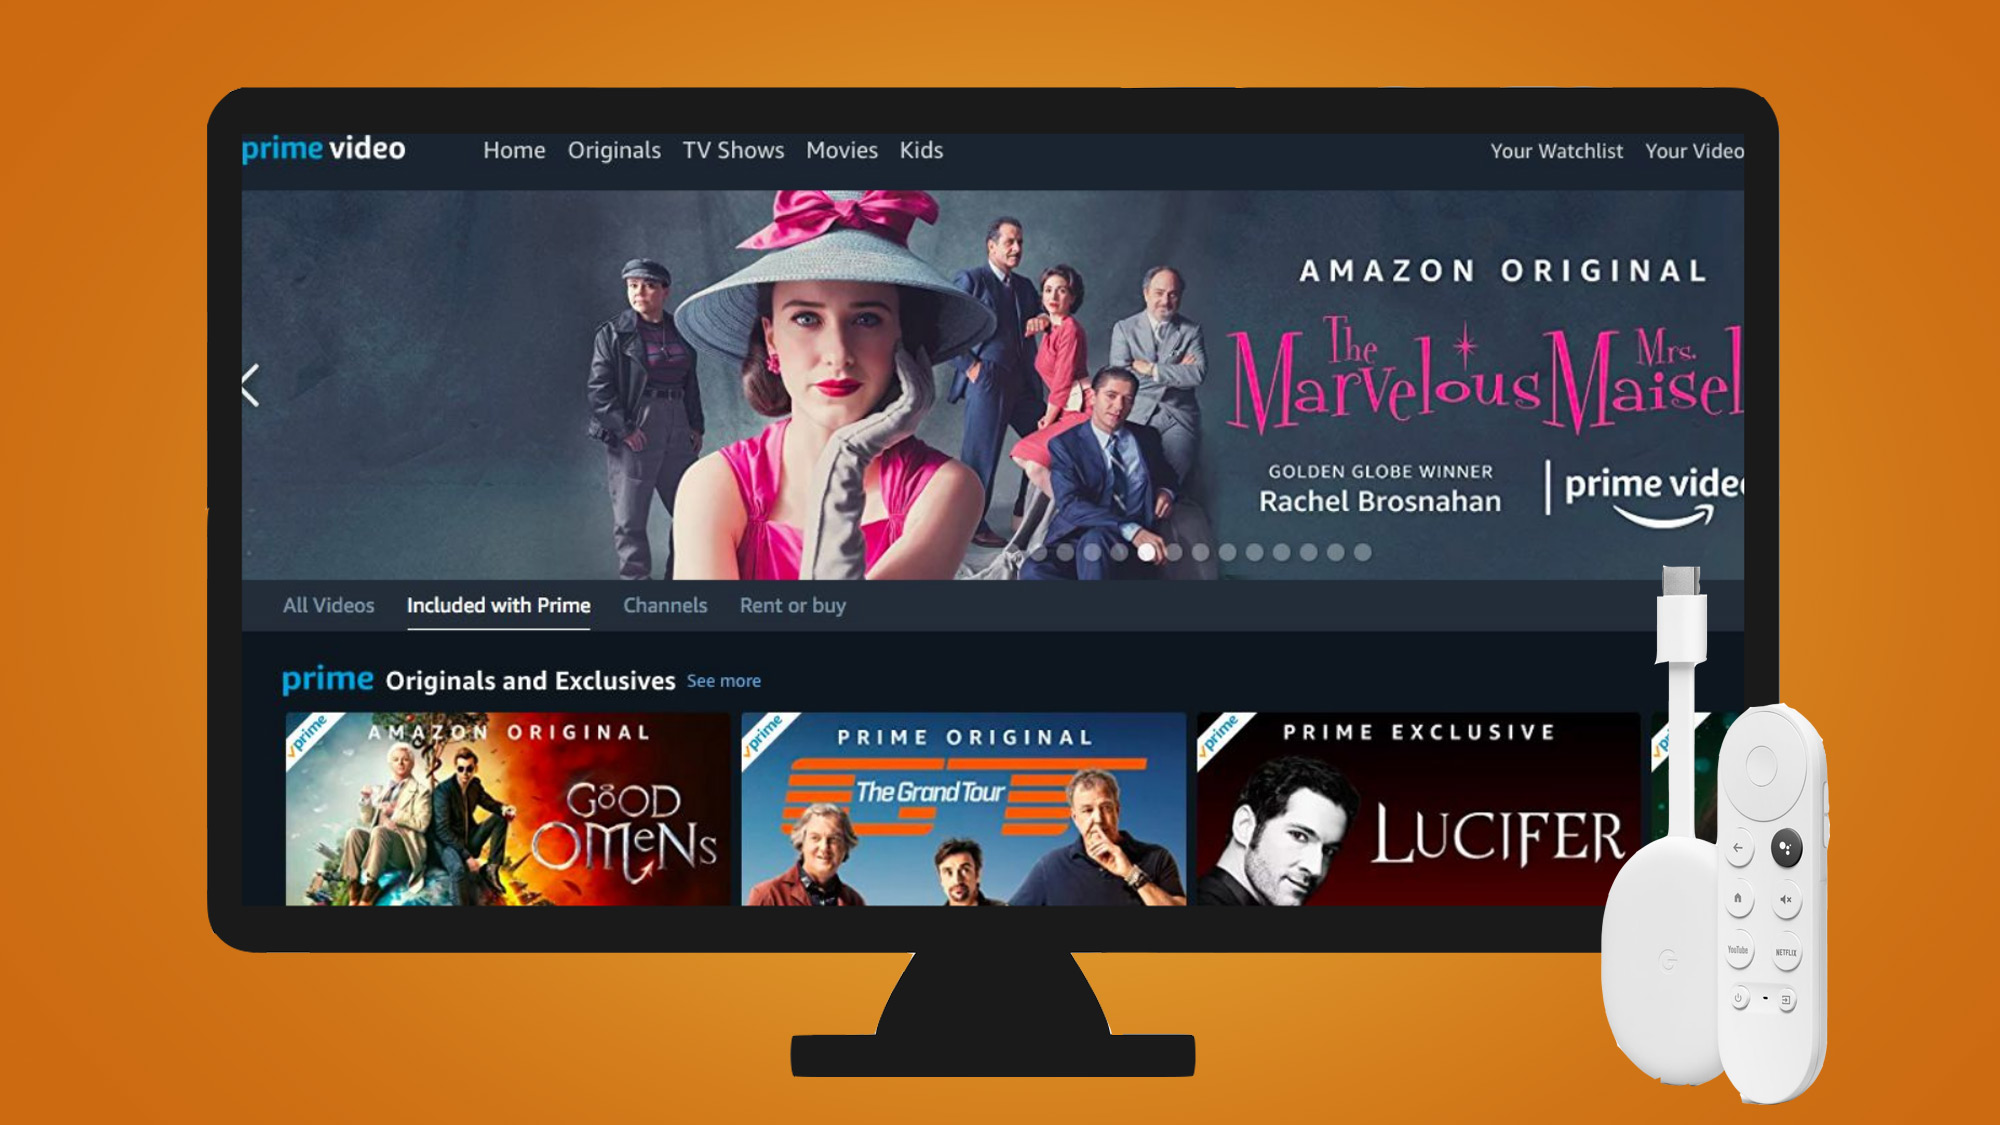 royalty evigt stof Amazon Prime Video on Chromecast: how to get it and start watching now |  TechRadar